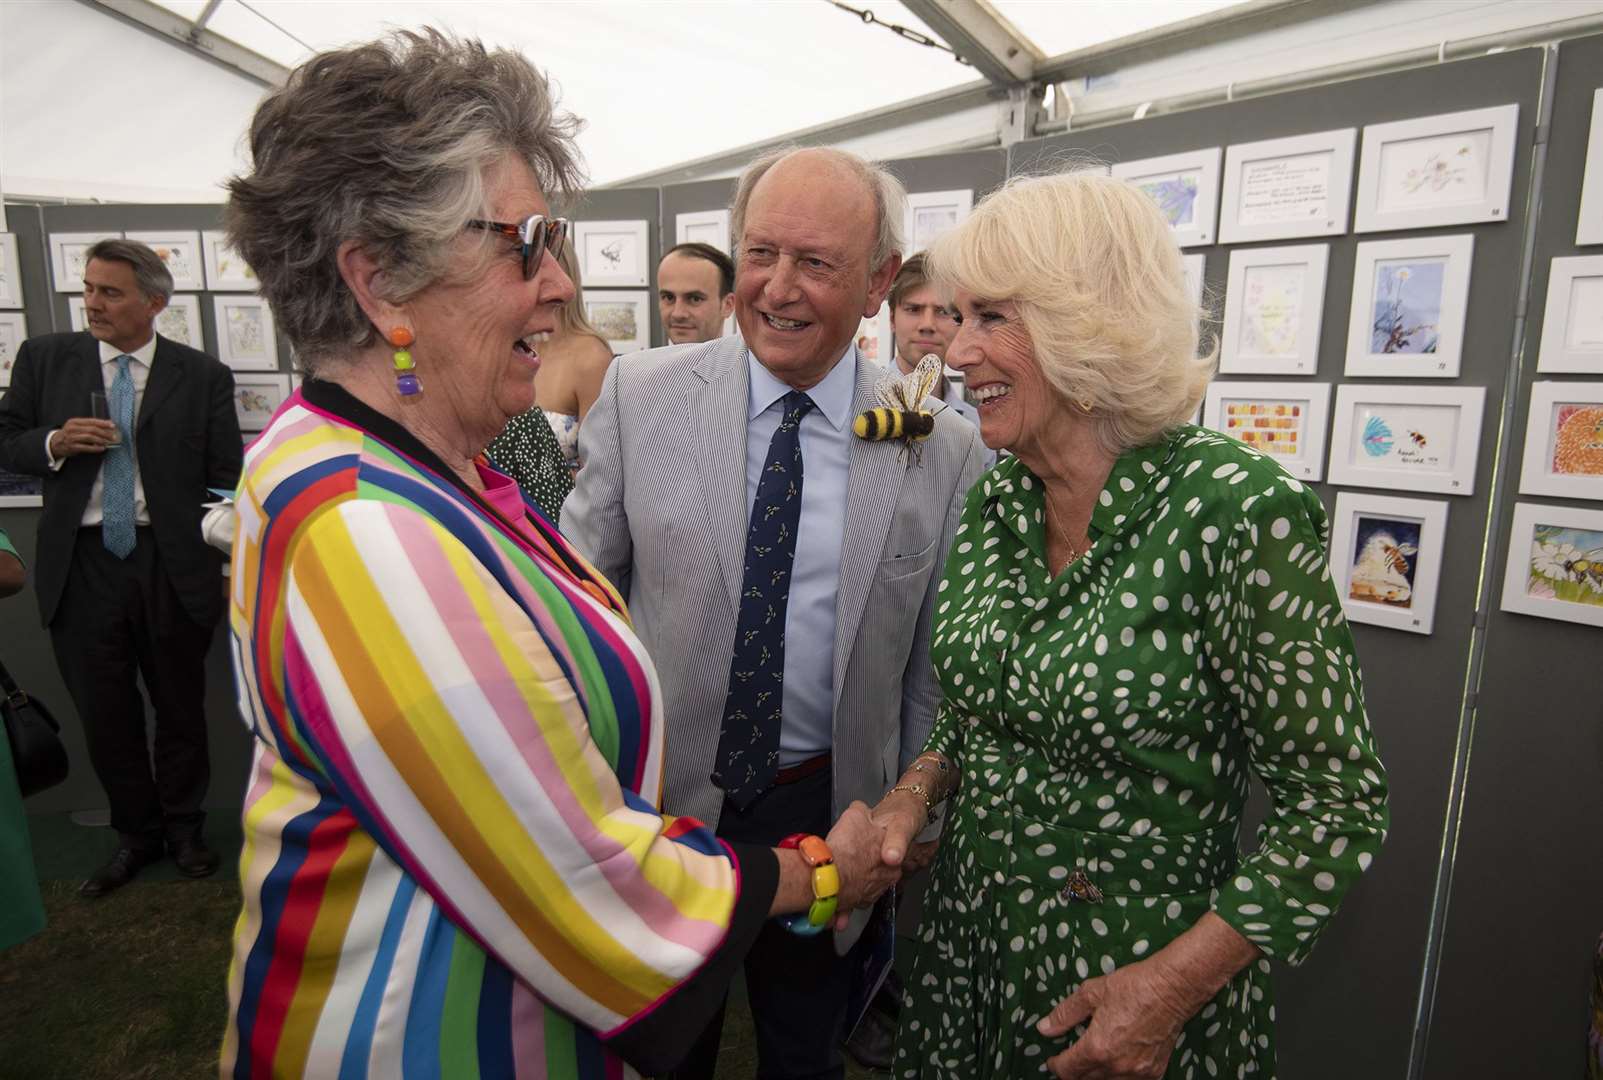 Camilla spoke with Dame Prue Leith during her garden party visit (Eddie Mulholland/Daily Telegraph/PA)